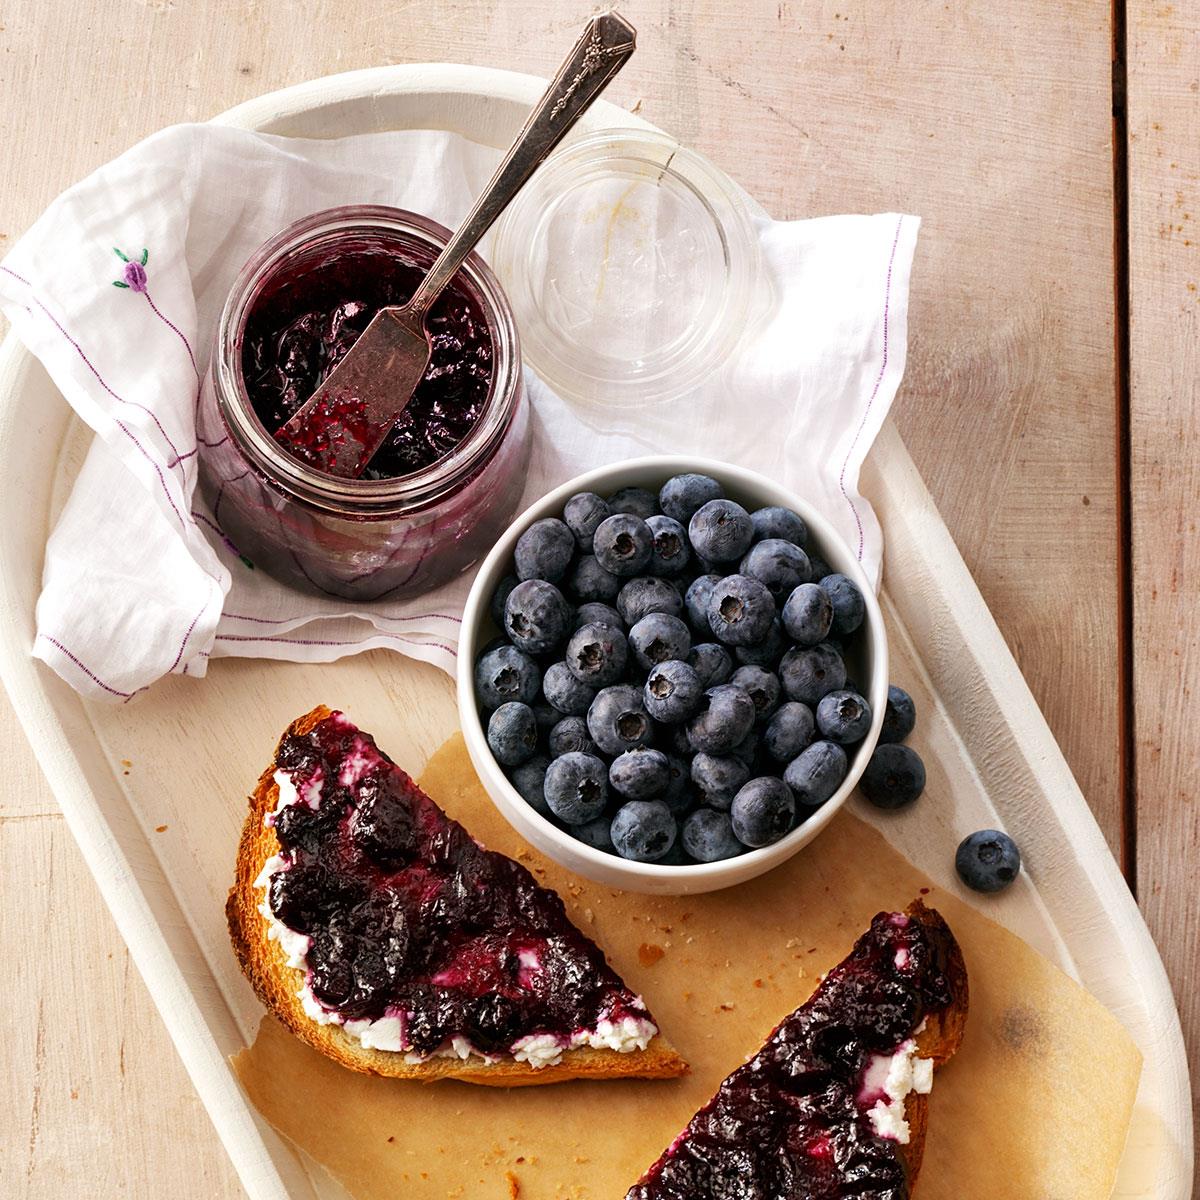 Canned Blueberry Jam Recipe: How to Make It